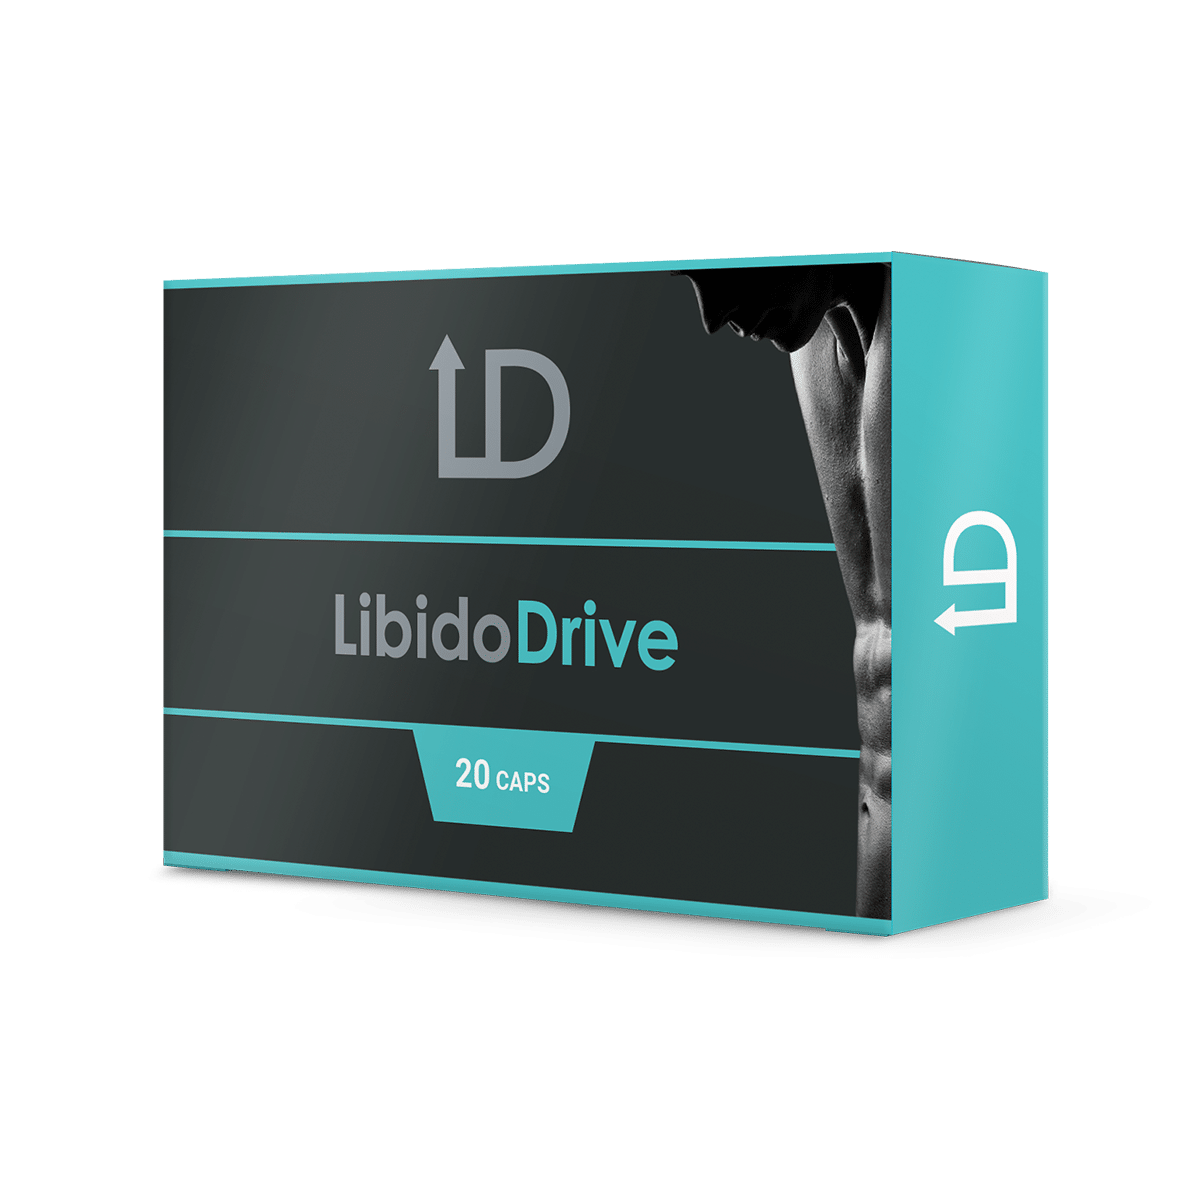 Libido Drive what is it?